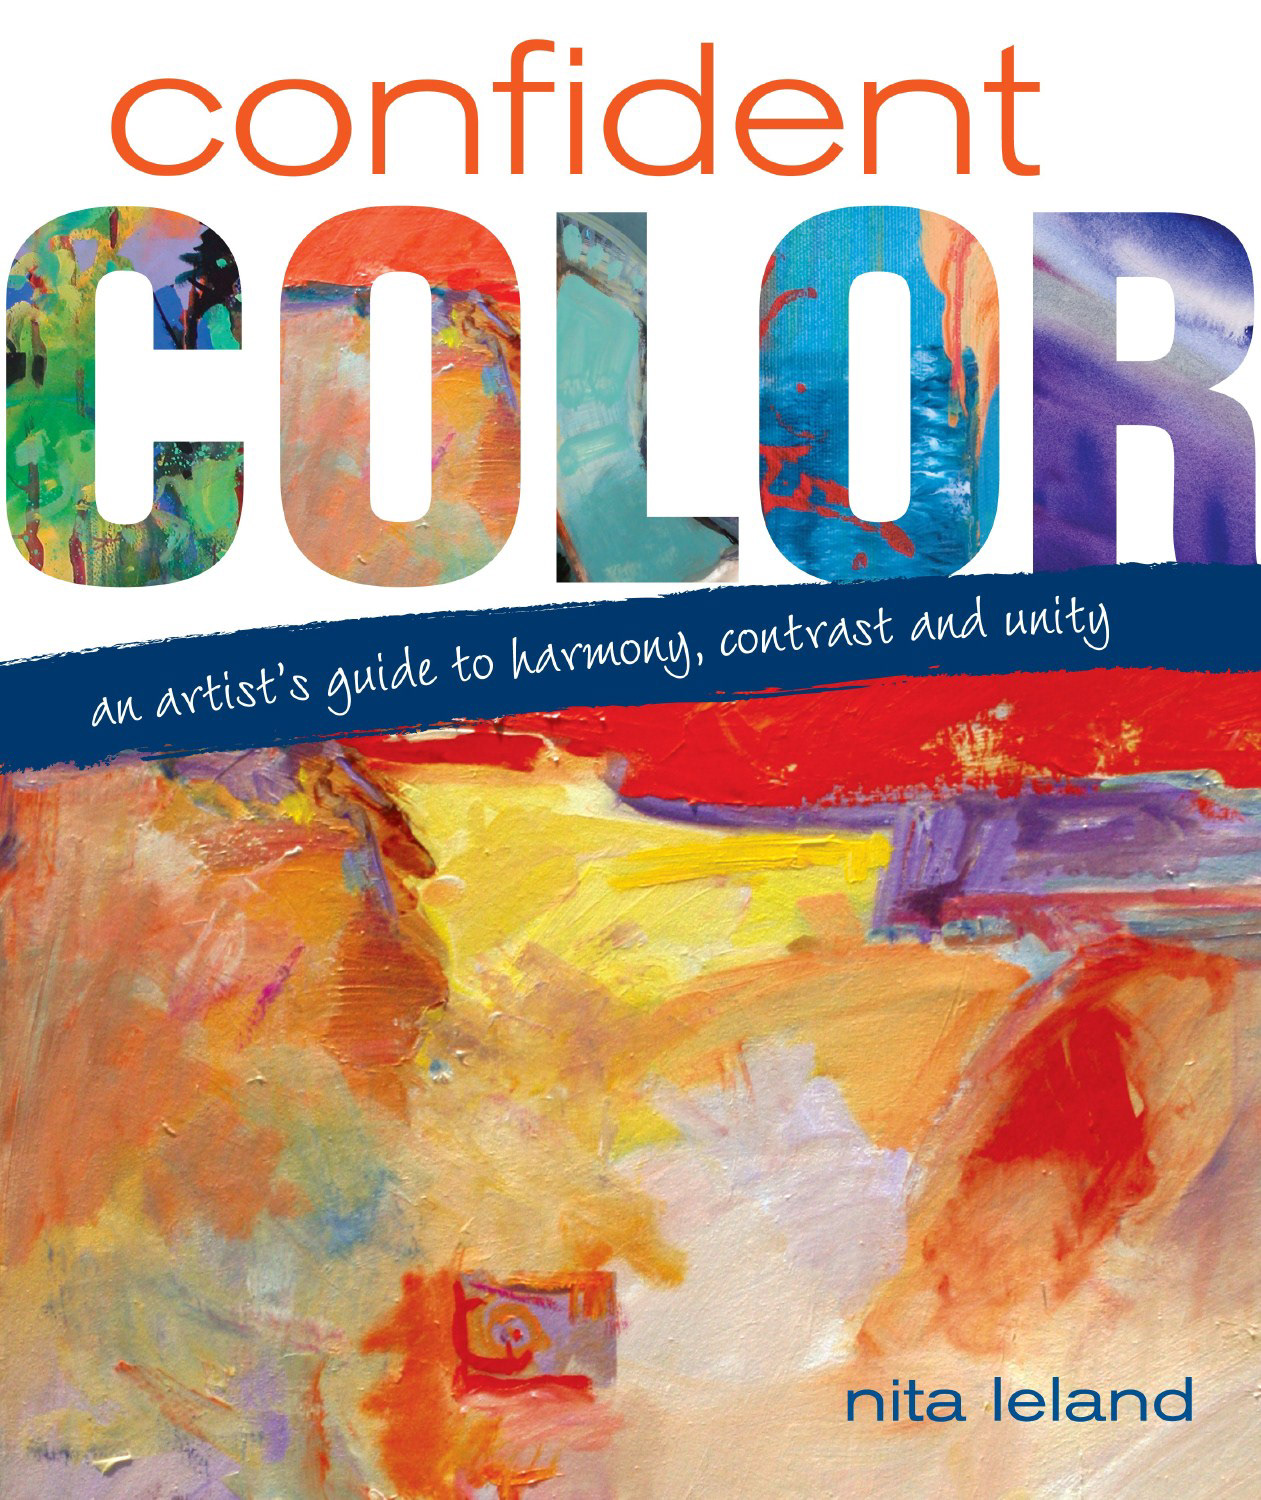 Art Color Theory Book Cover